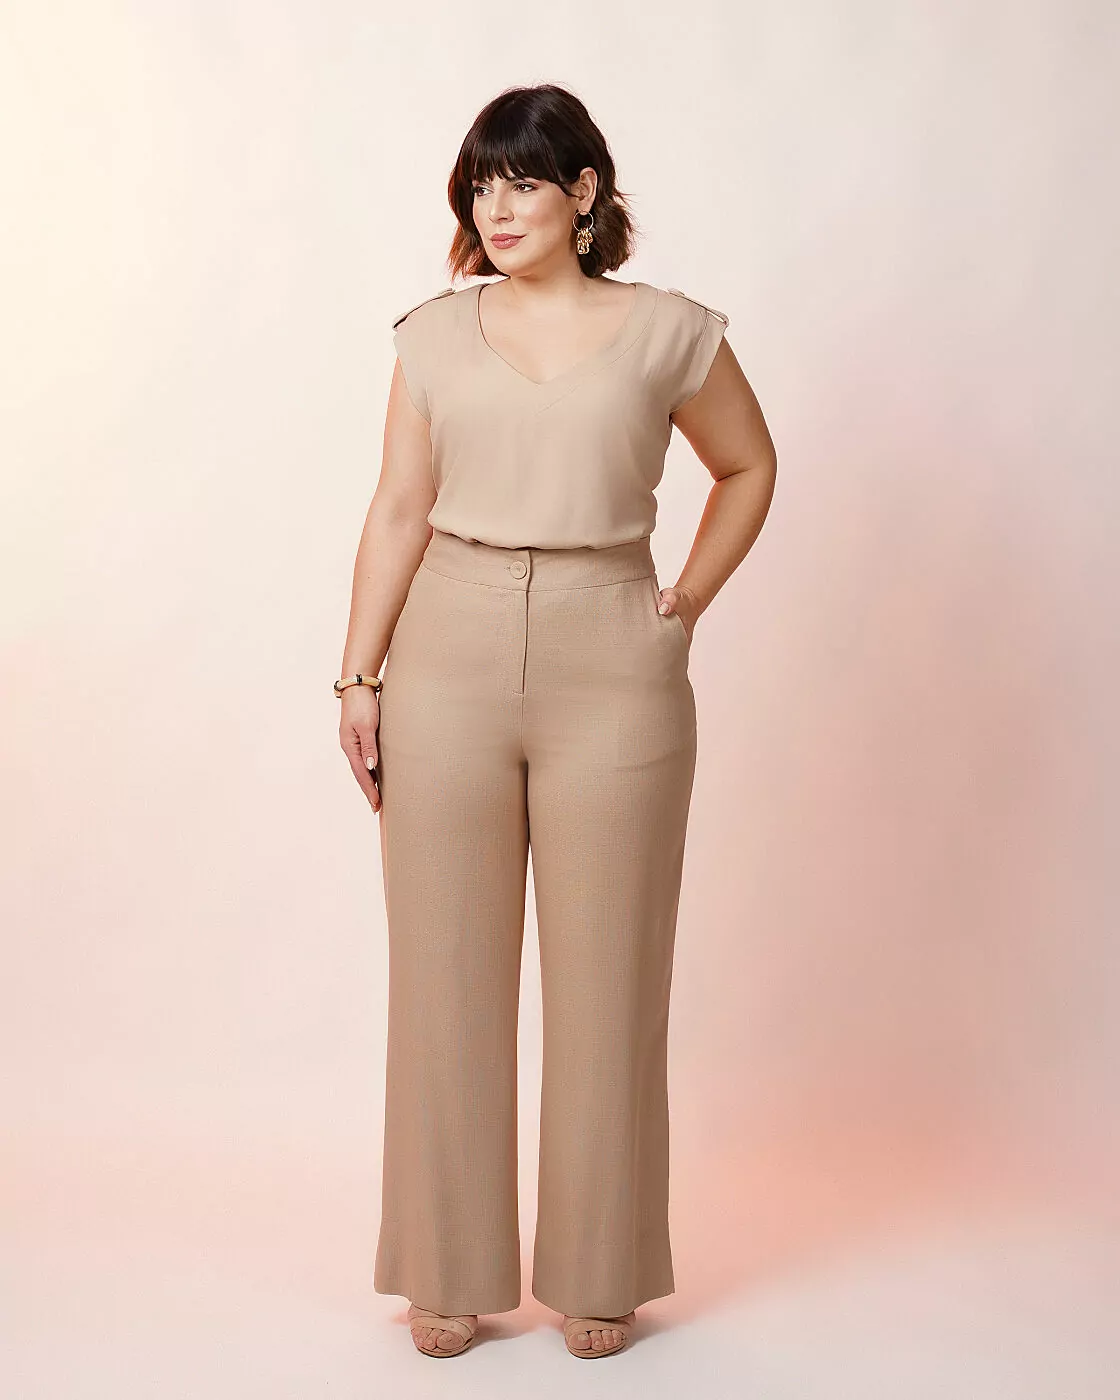 trousers and shirt - shanes curve designer 